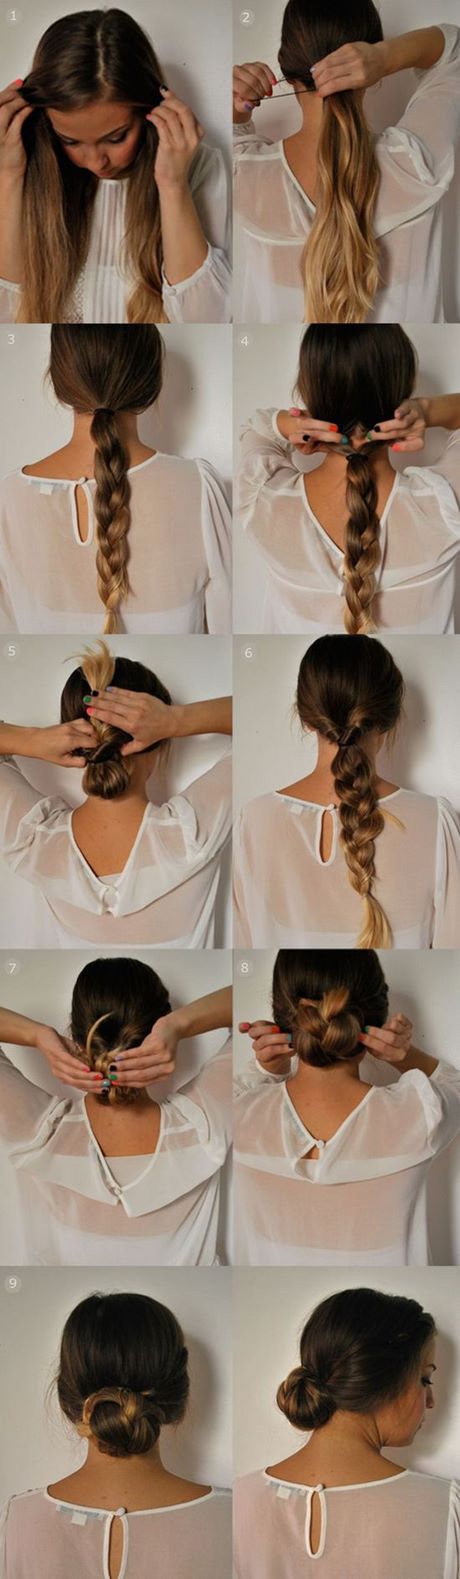 Quick easy hairstyles for shoulder length hair quick-easy-hairstyles-for-shoulder-length-hair-60_4